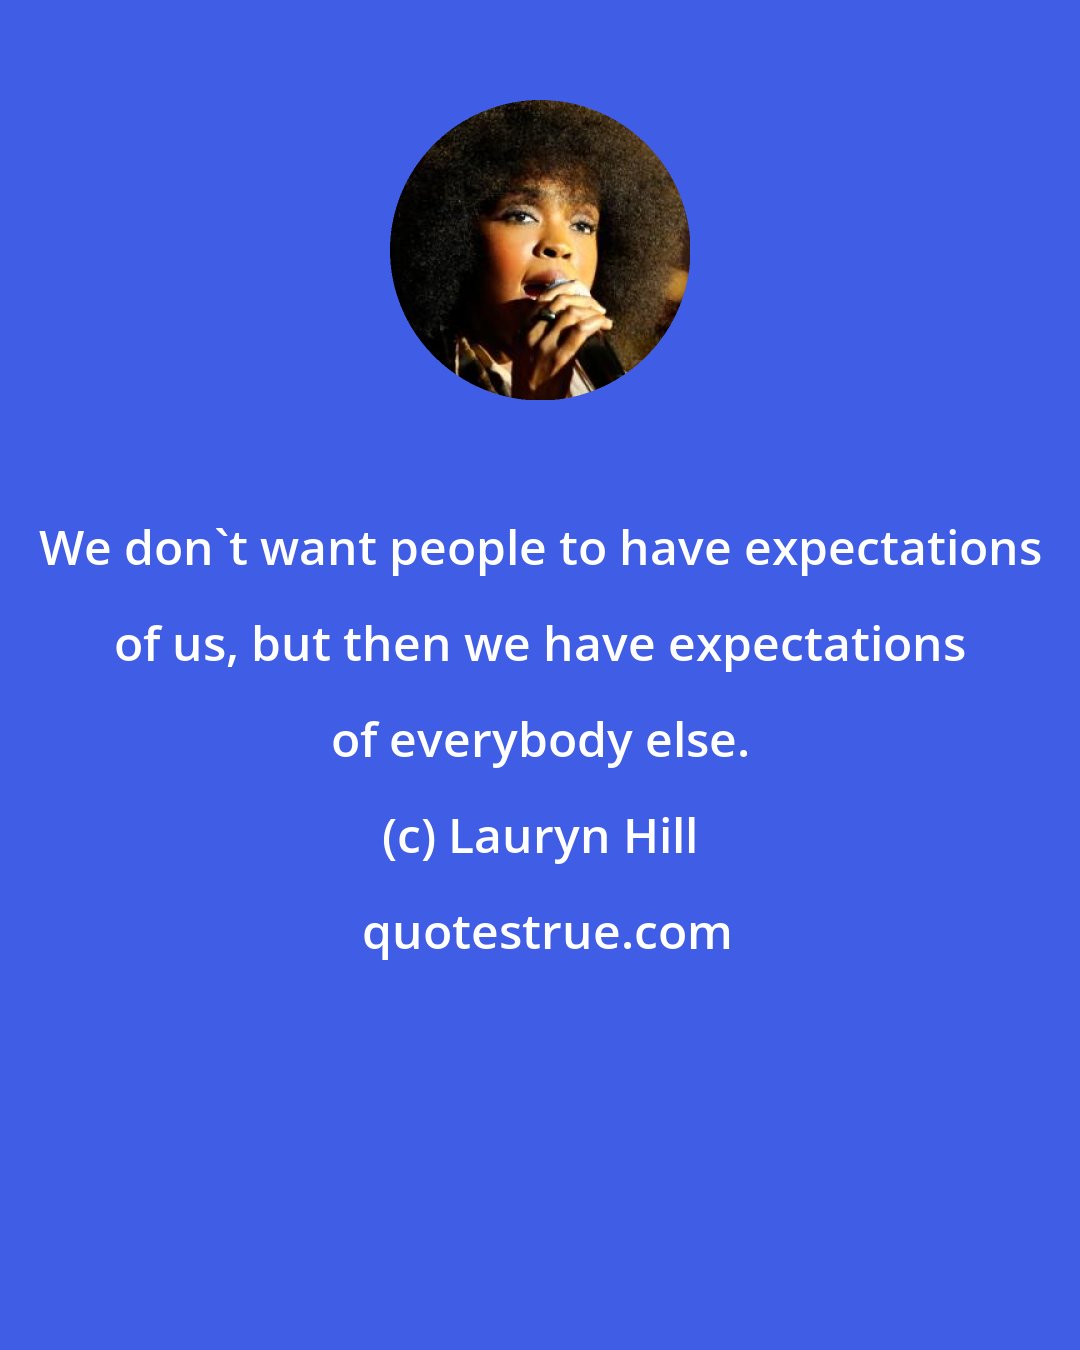 Lauryn Hill: We don't want people to have expectations of us, but then we have expectations of everybody else.